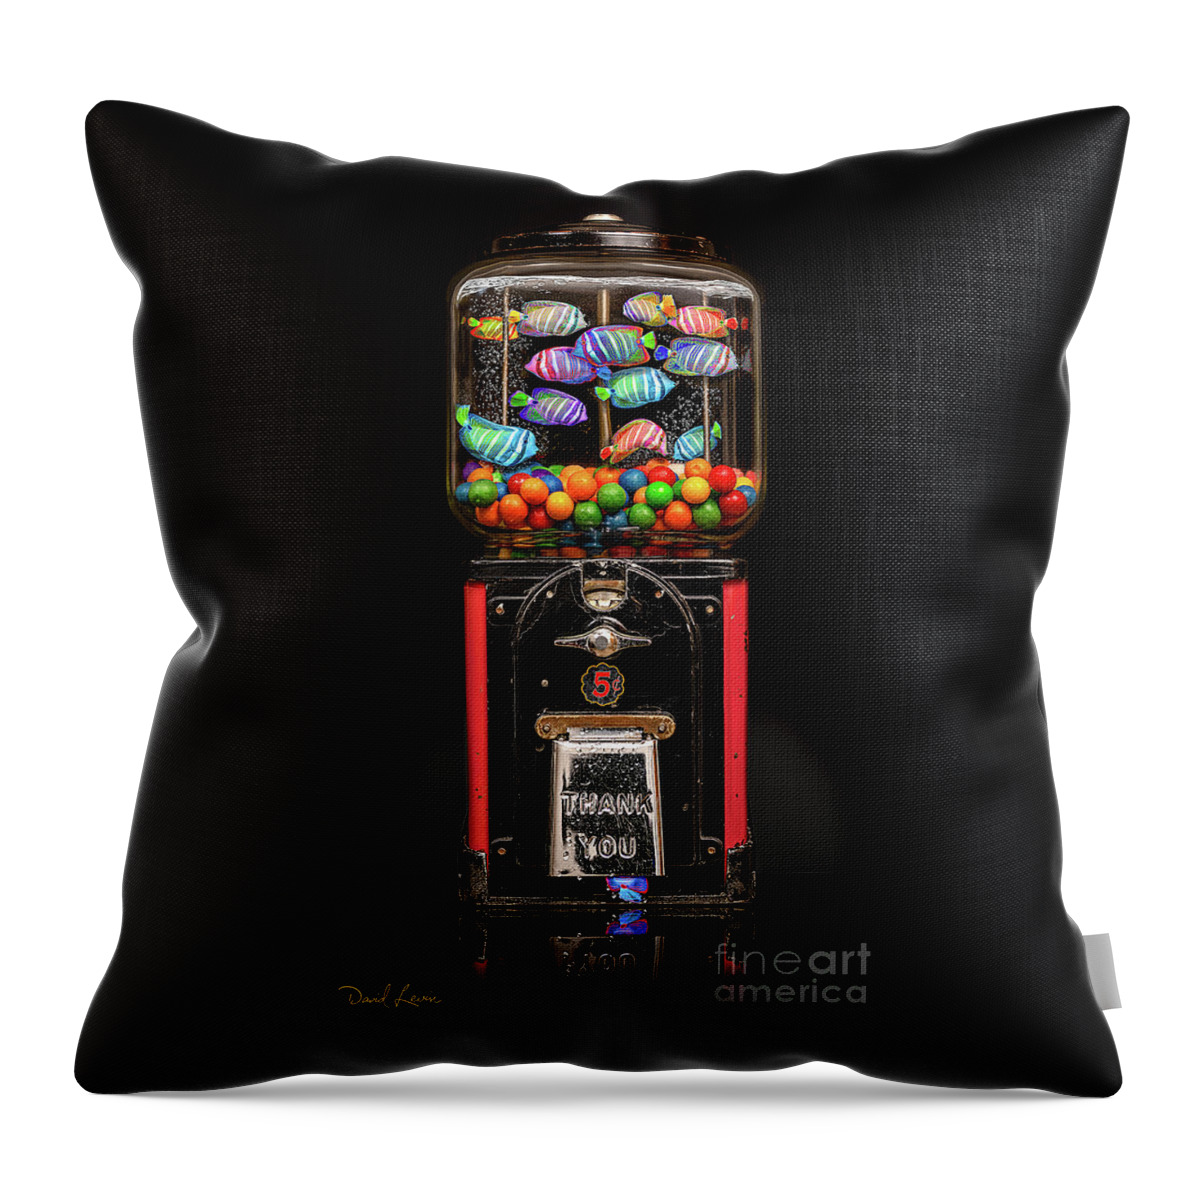 Aquarium Throw Pillow featuring the photograph Gumball Fish by David Levin